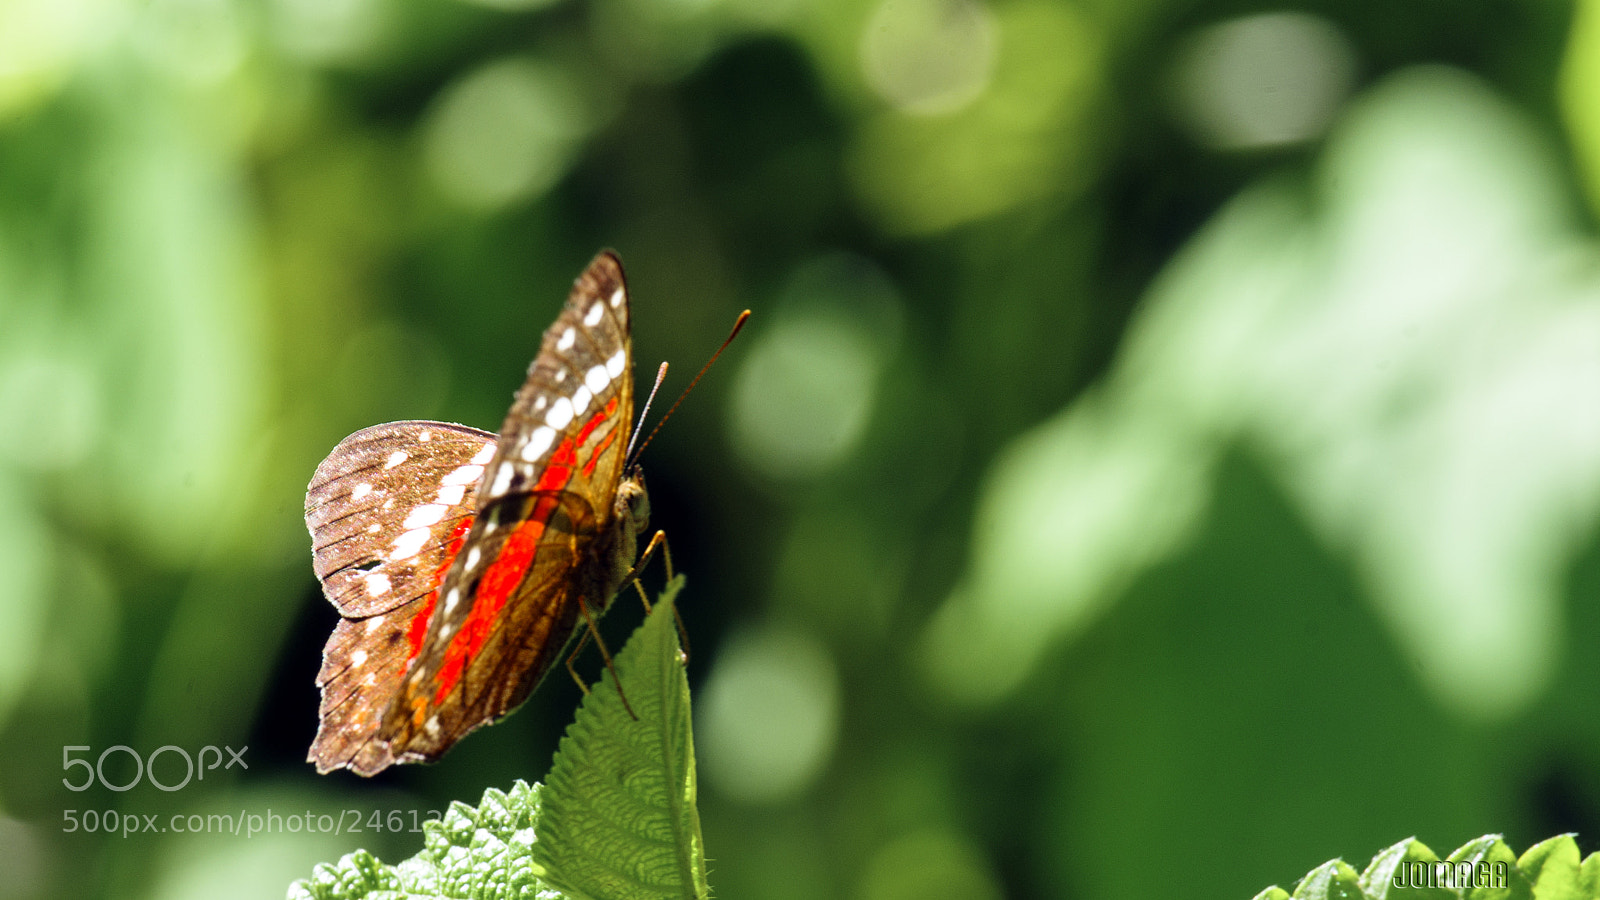 Pentax K-1 sample photo. Butterfly and bokeh photography